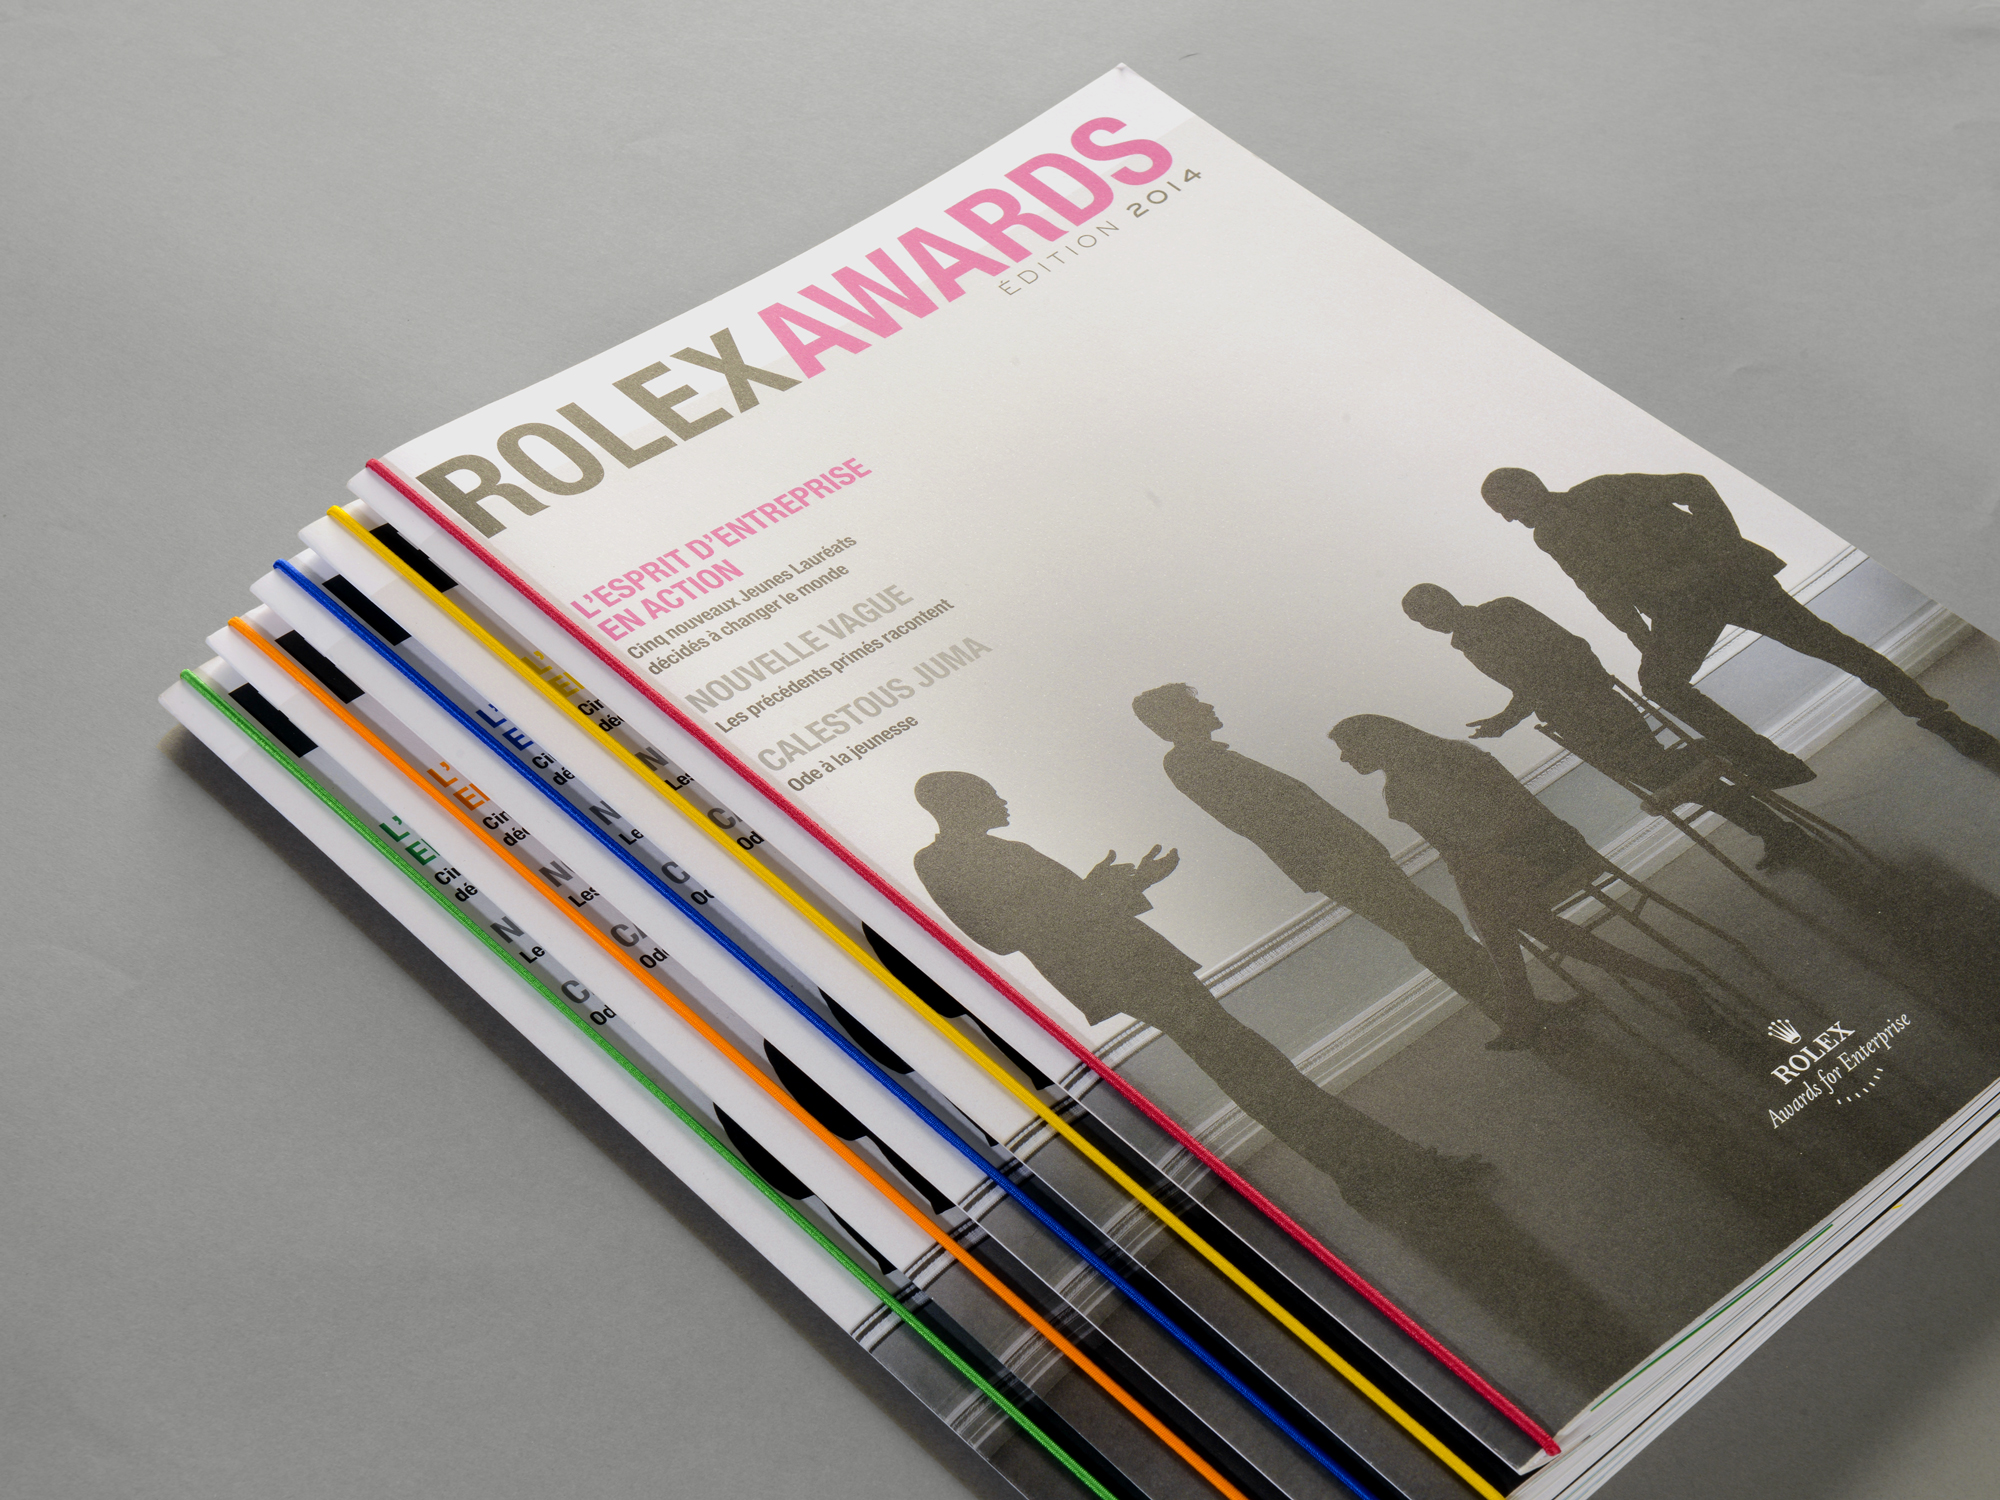 ROLEX AWARDS covers